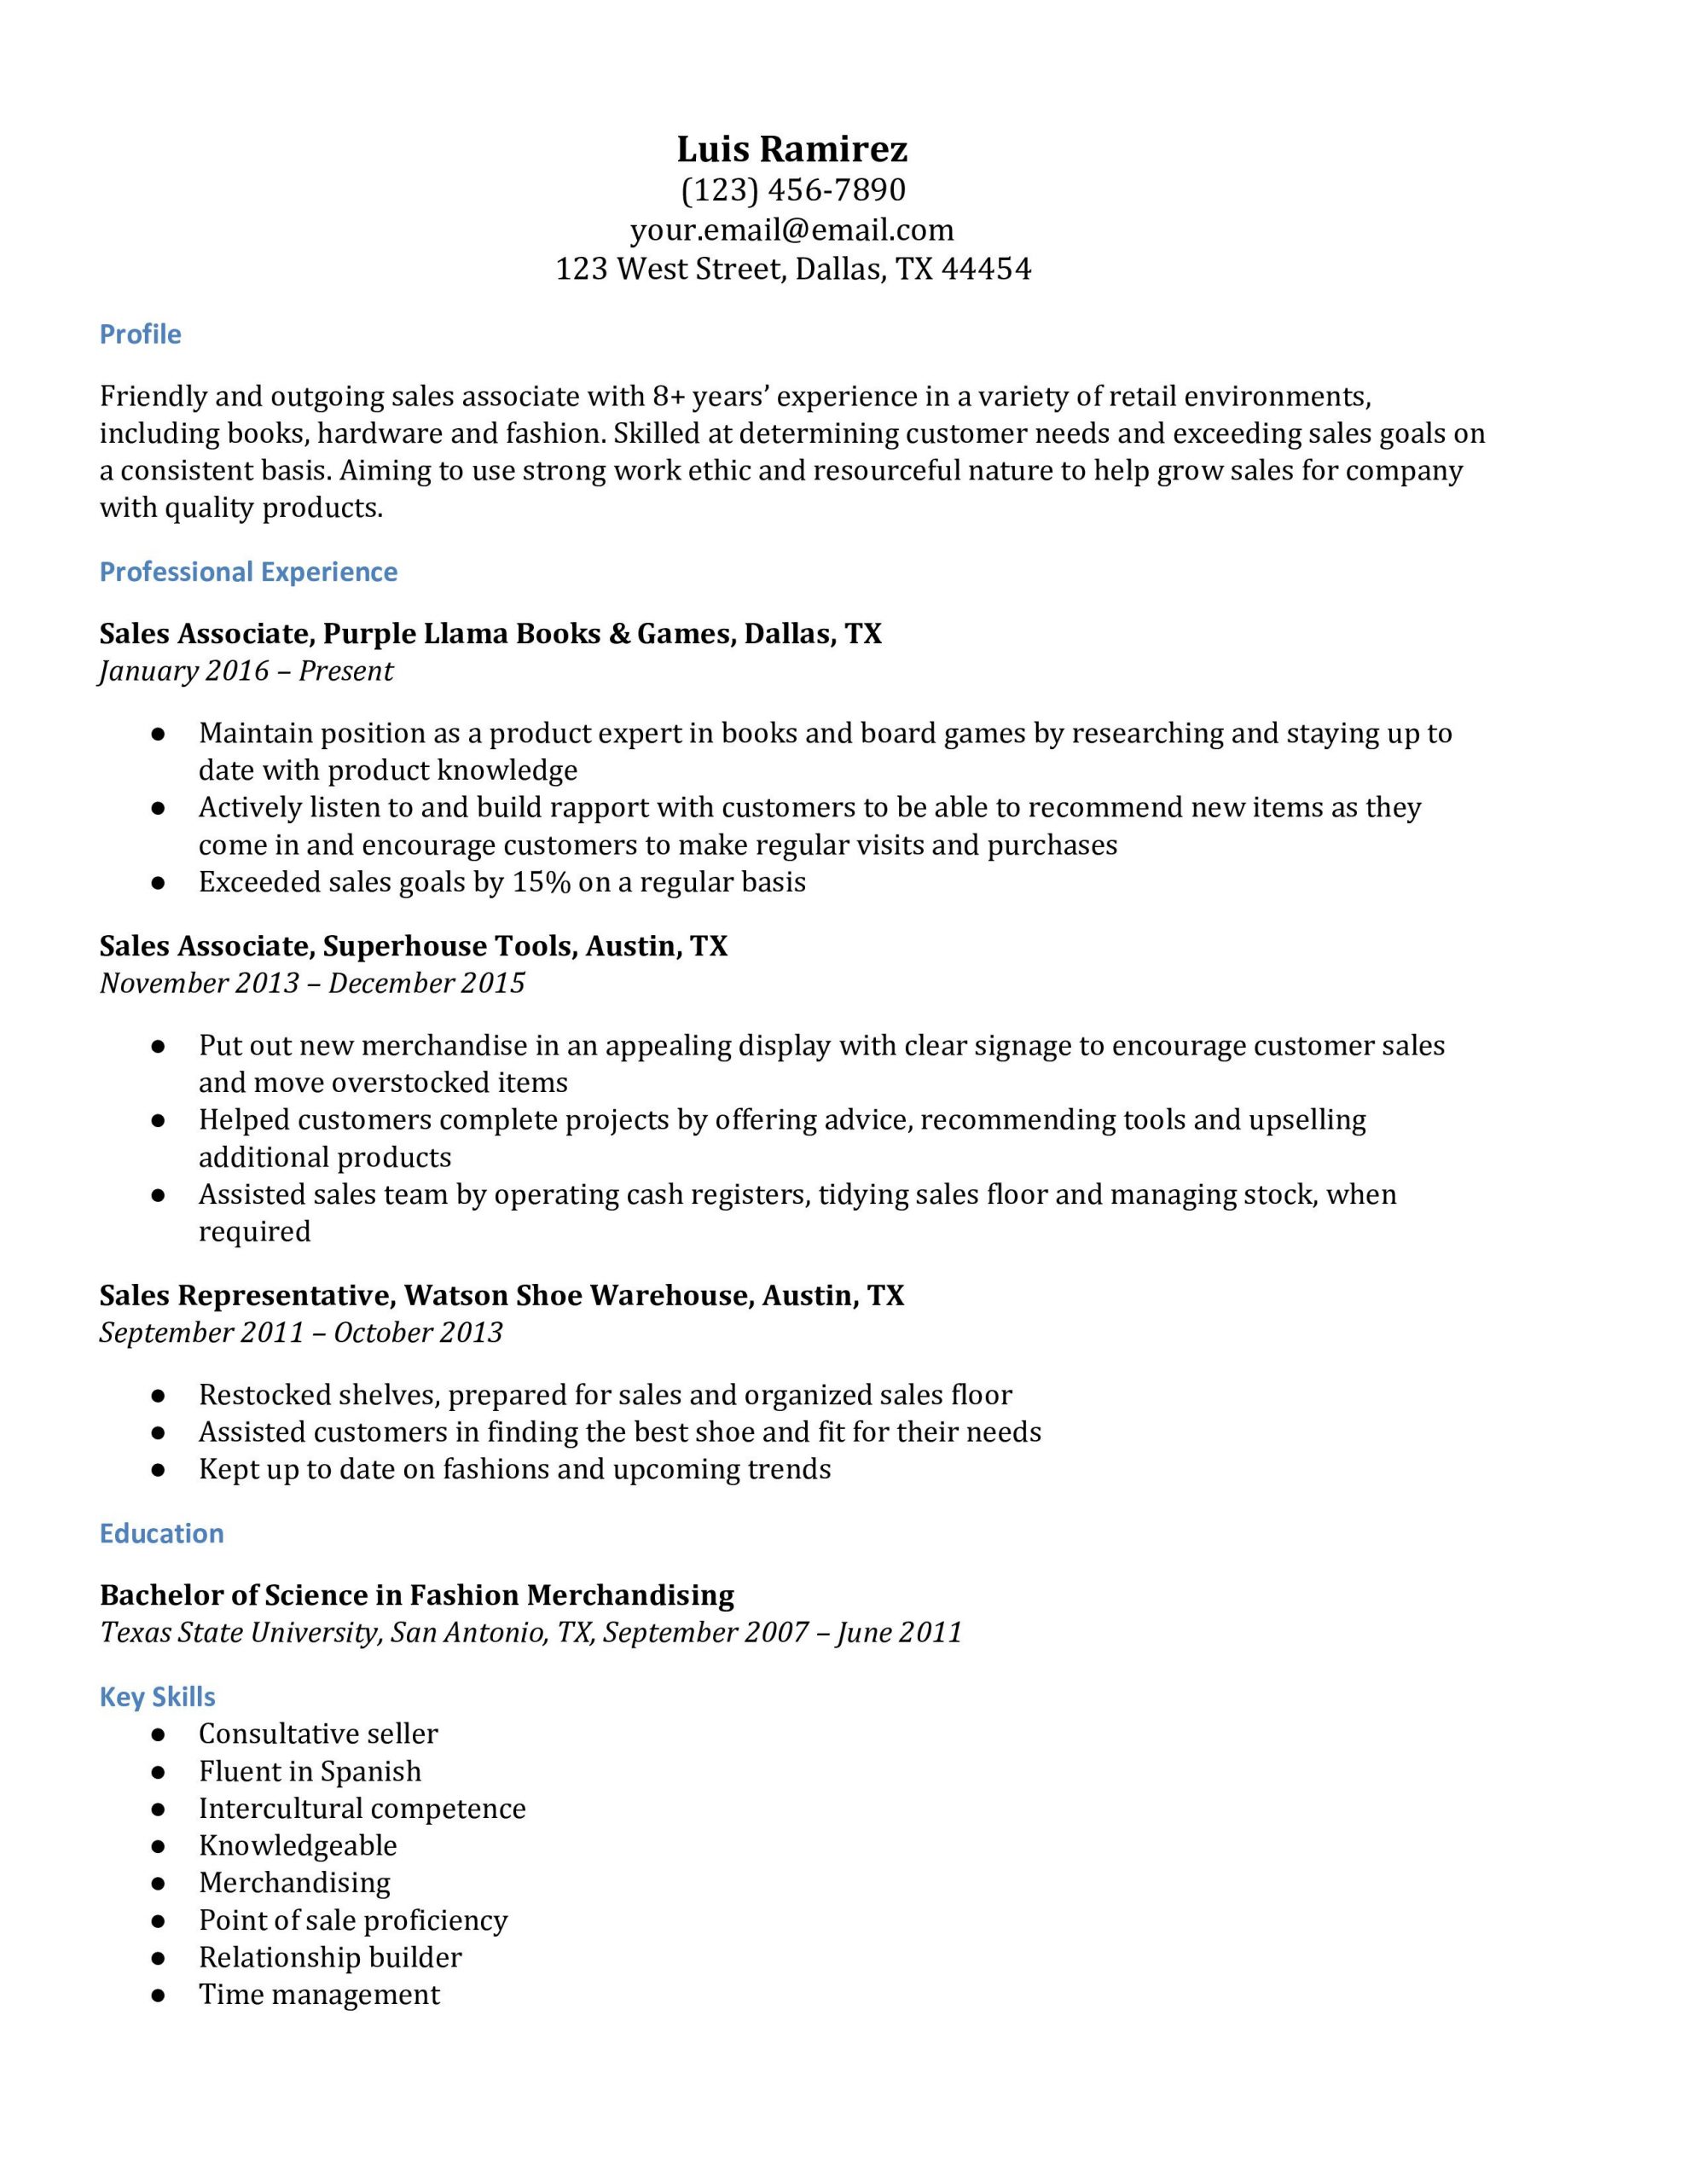 Sample Resume for Clothing Retail Sales associate Retail Sales associate Resume Examples – Resumebuilder.com